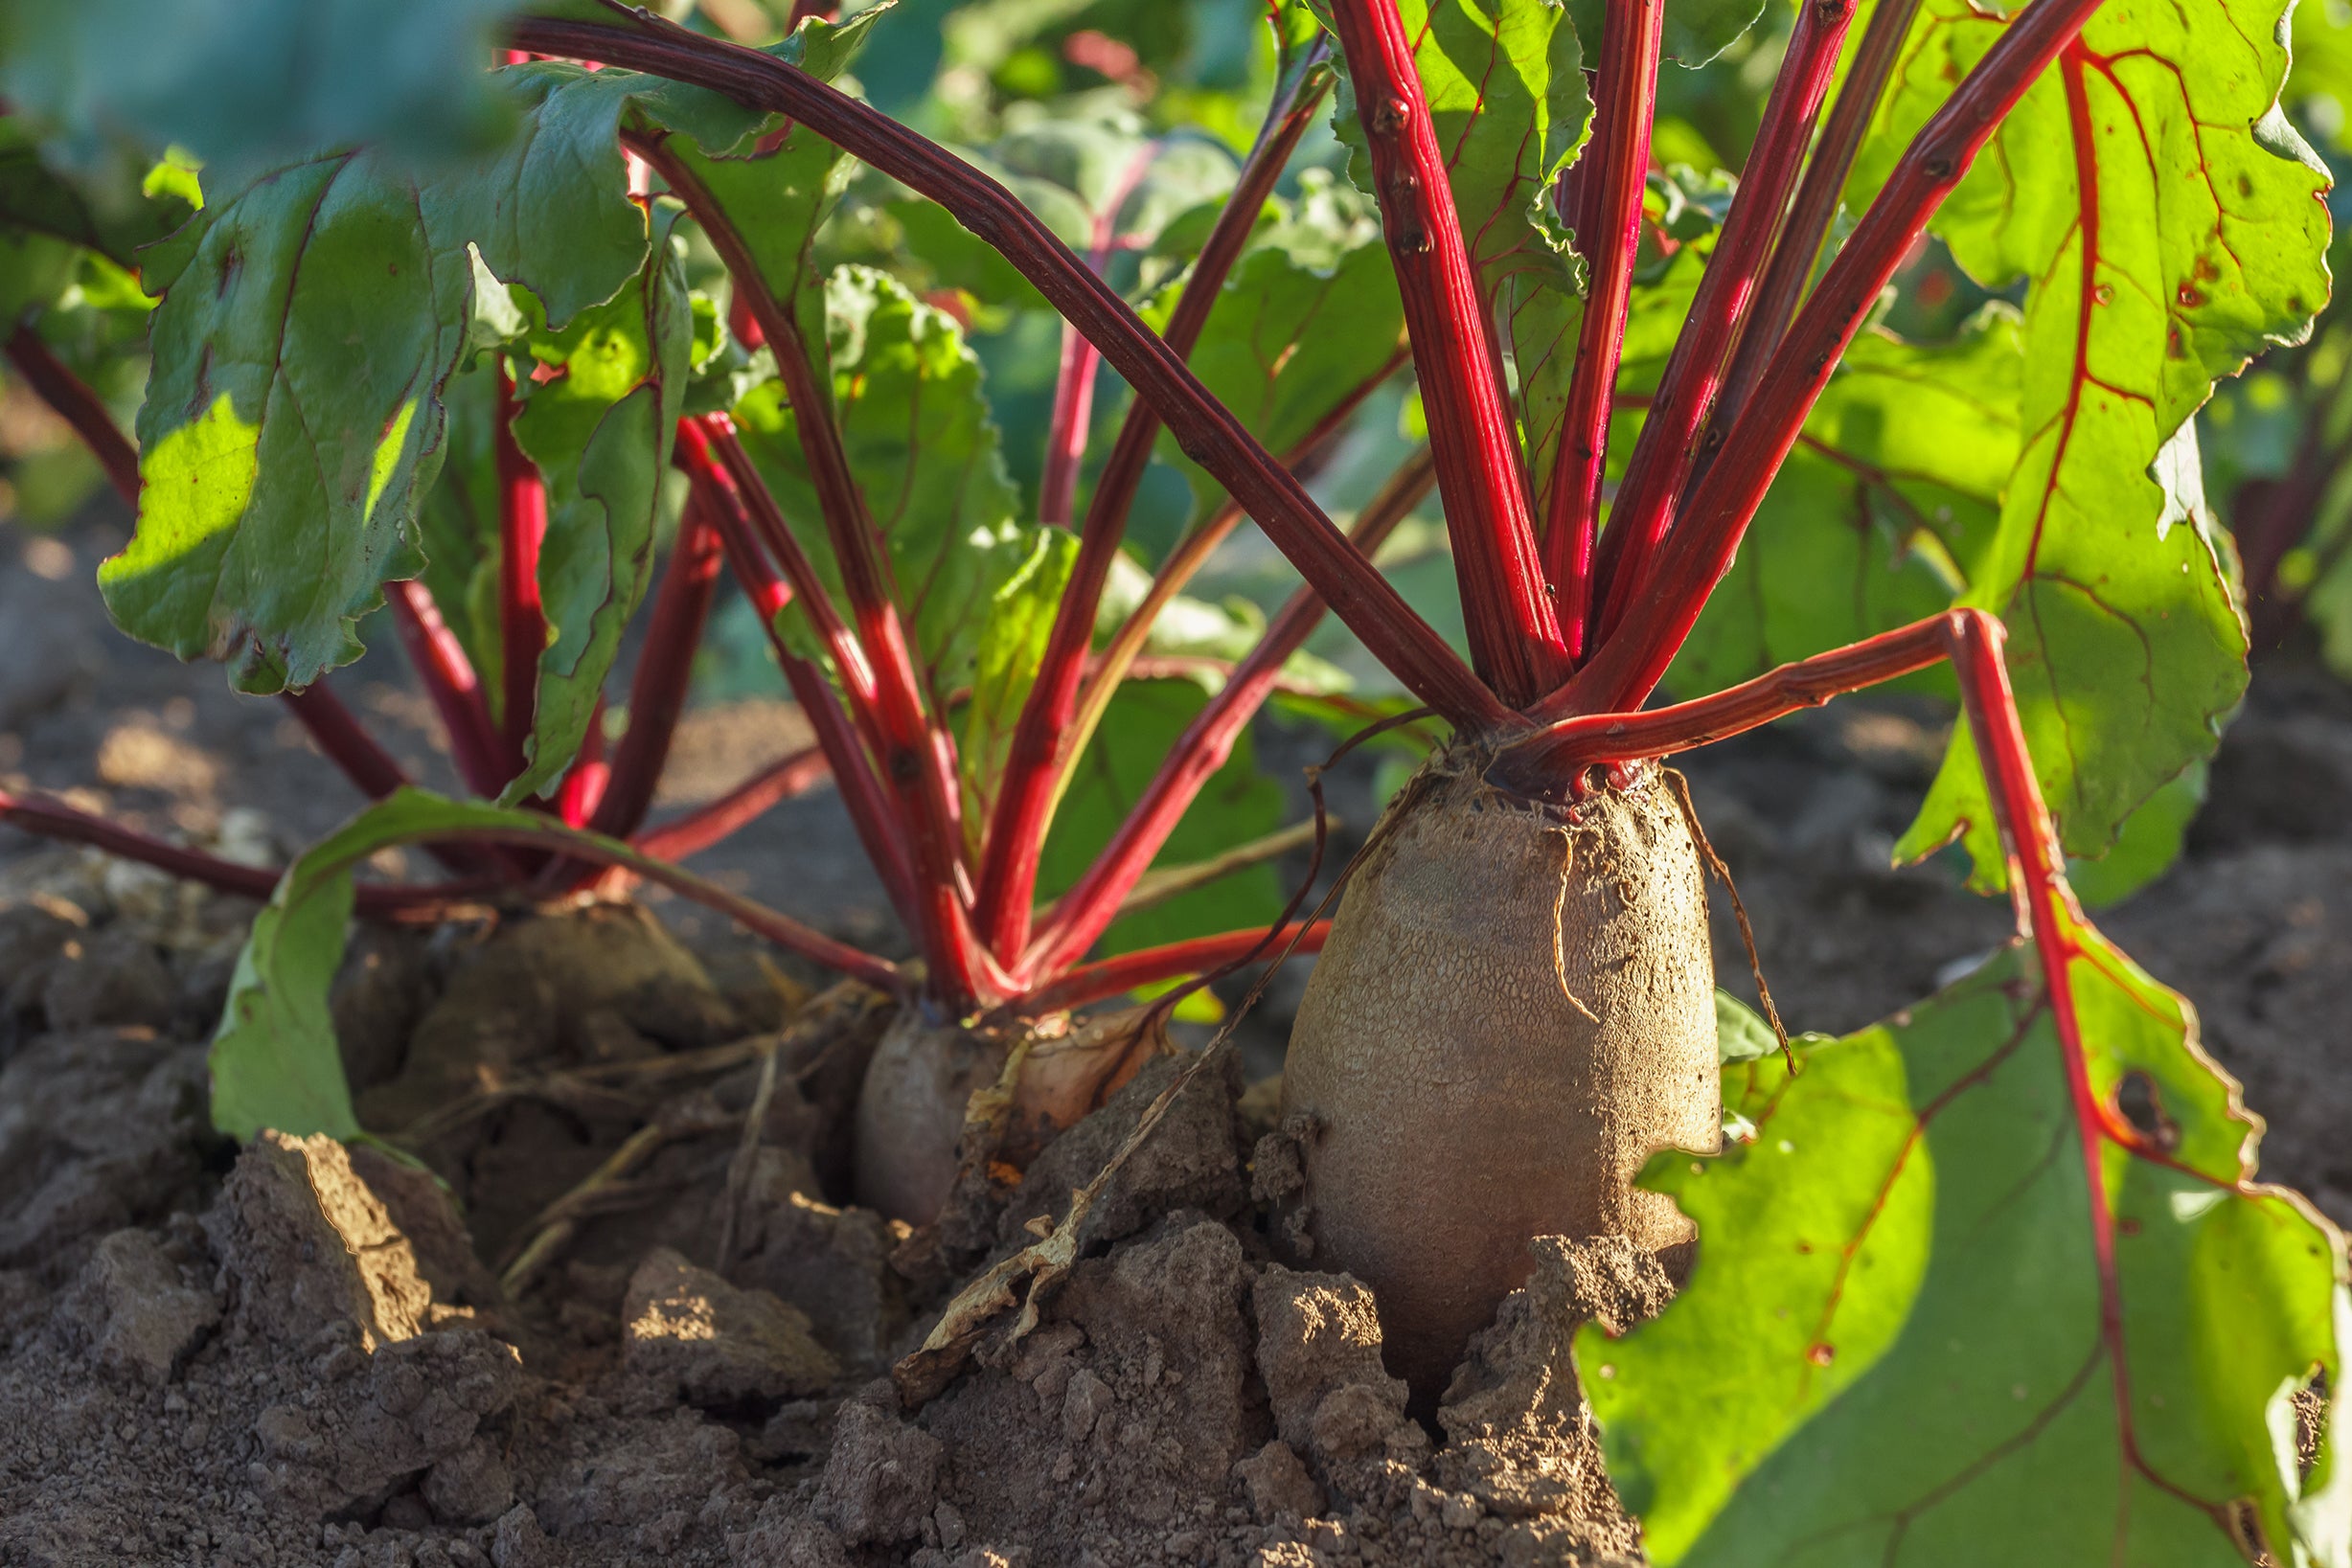 The root of beets that are used in Kekoa Foods' vegetable puree.